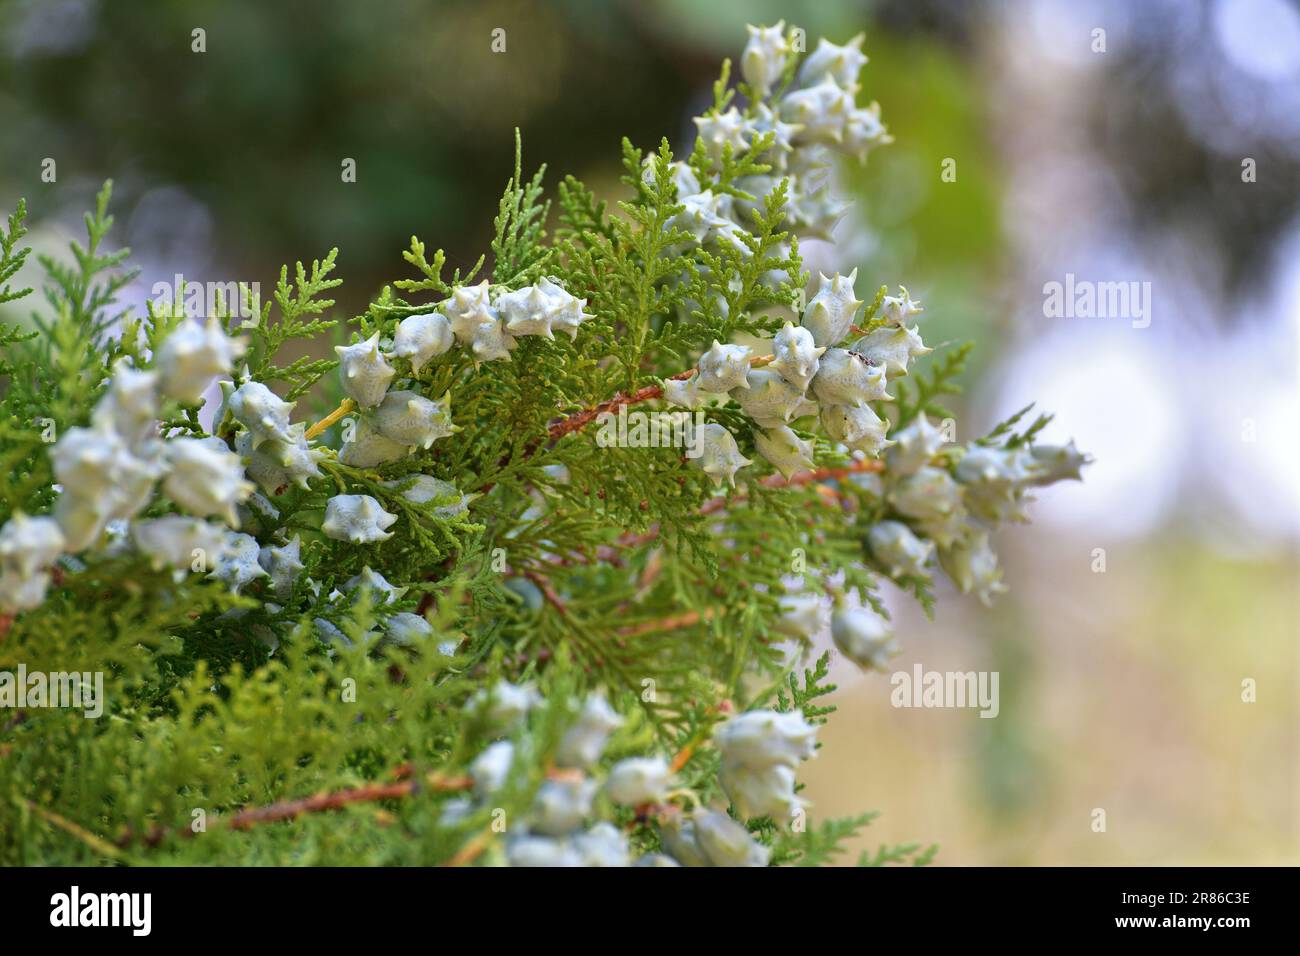 Platycladus orientalis or eastern - a branches with female cones Stock Photo